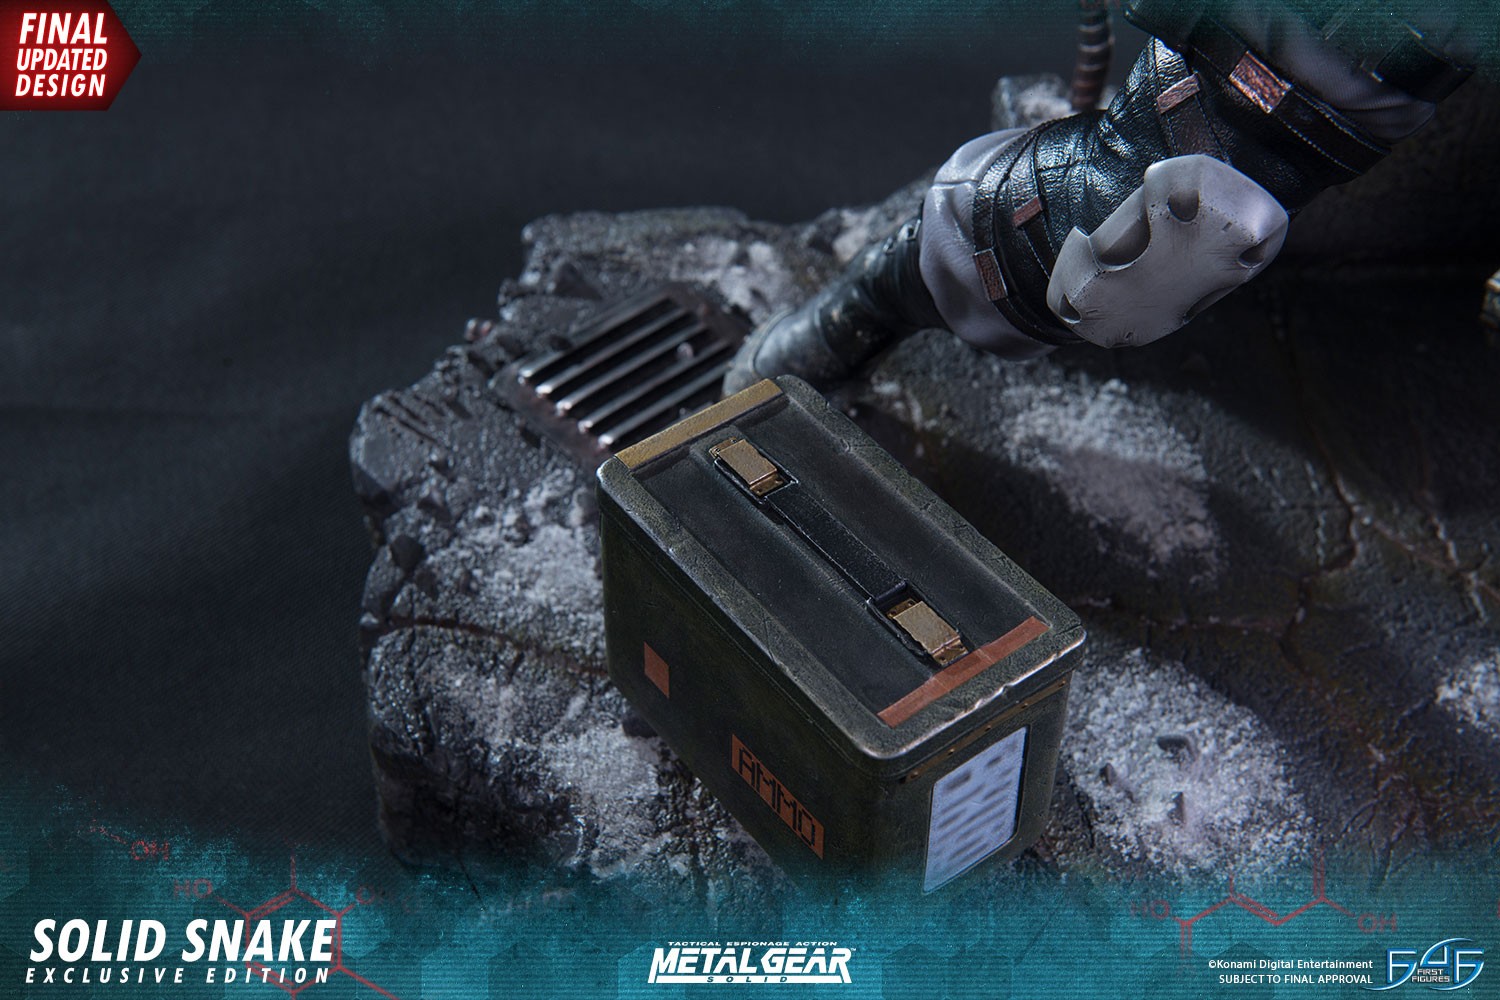 First 4 Figures Metal Gear Solid Resin Statue - Solid Snake Merchandise -  Zavvi US